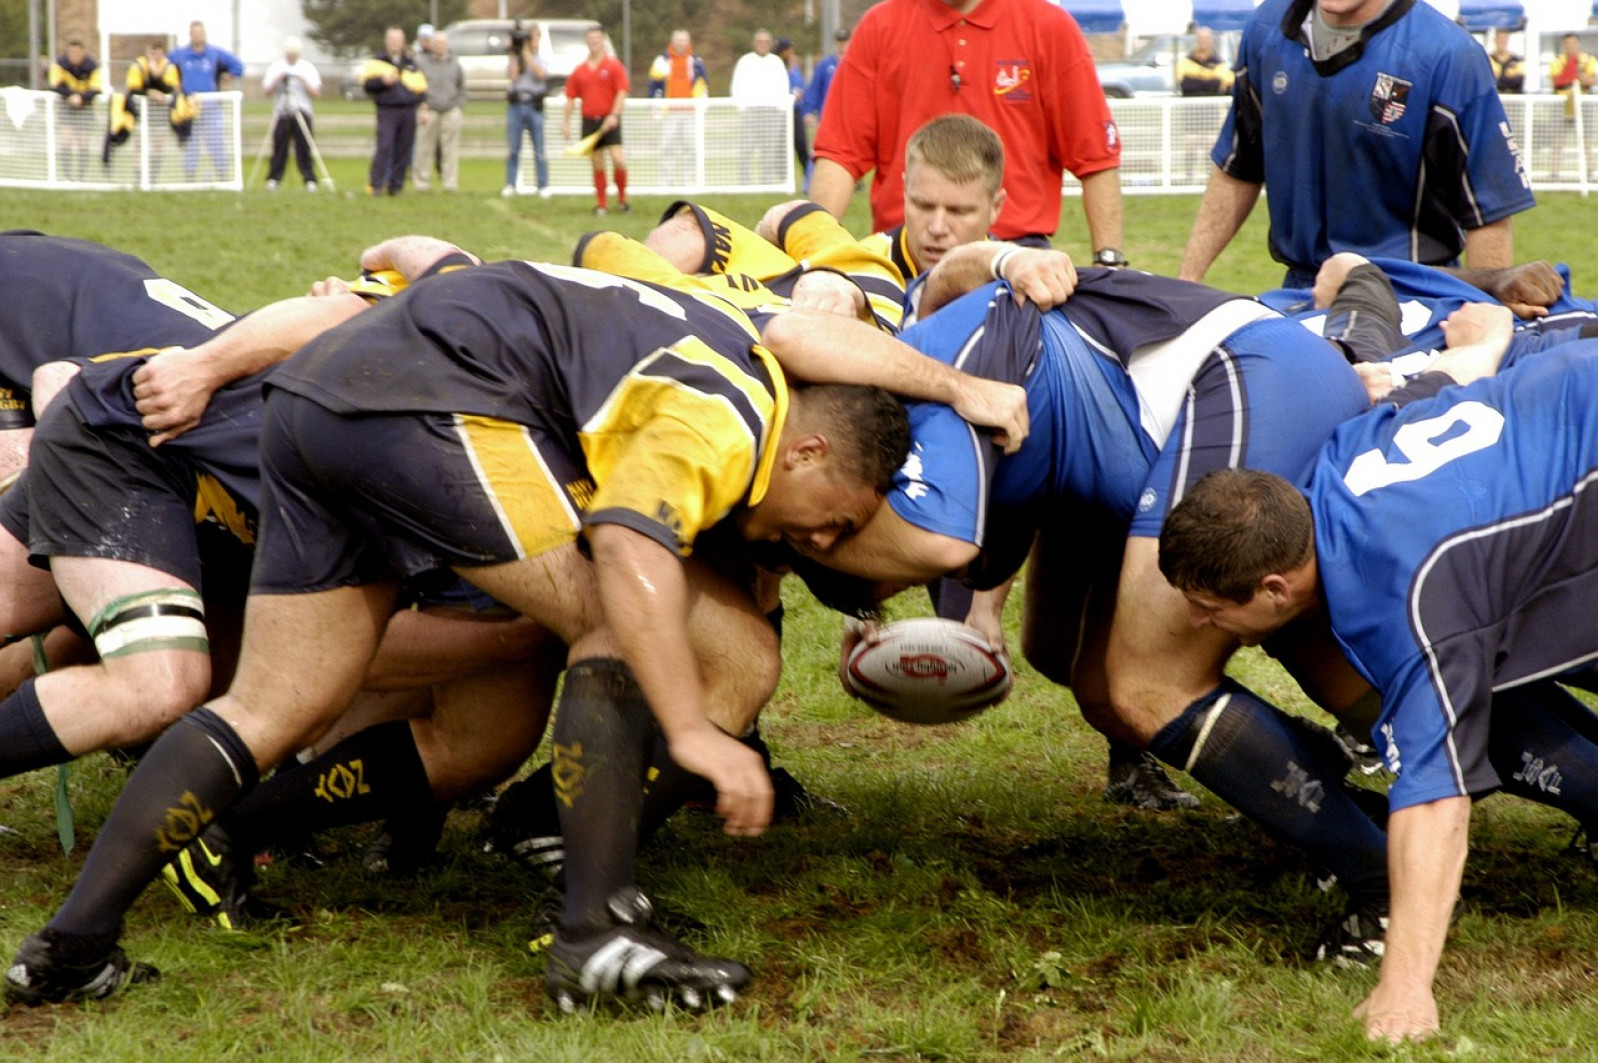 Can rugby players help tackle the manufacturing skills gap?